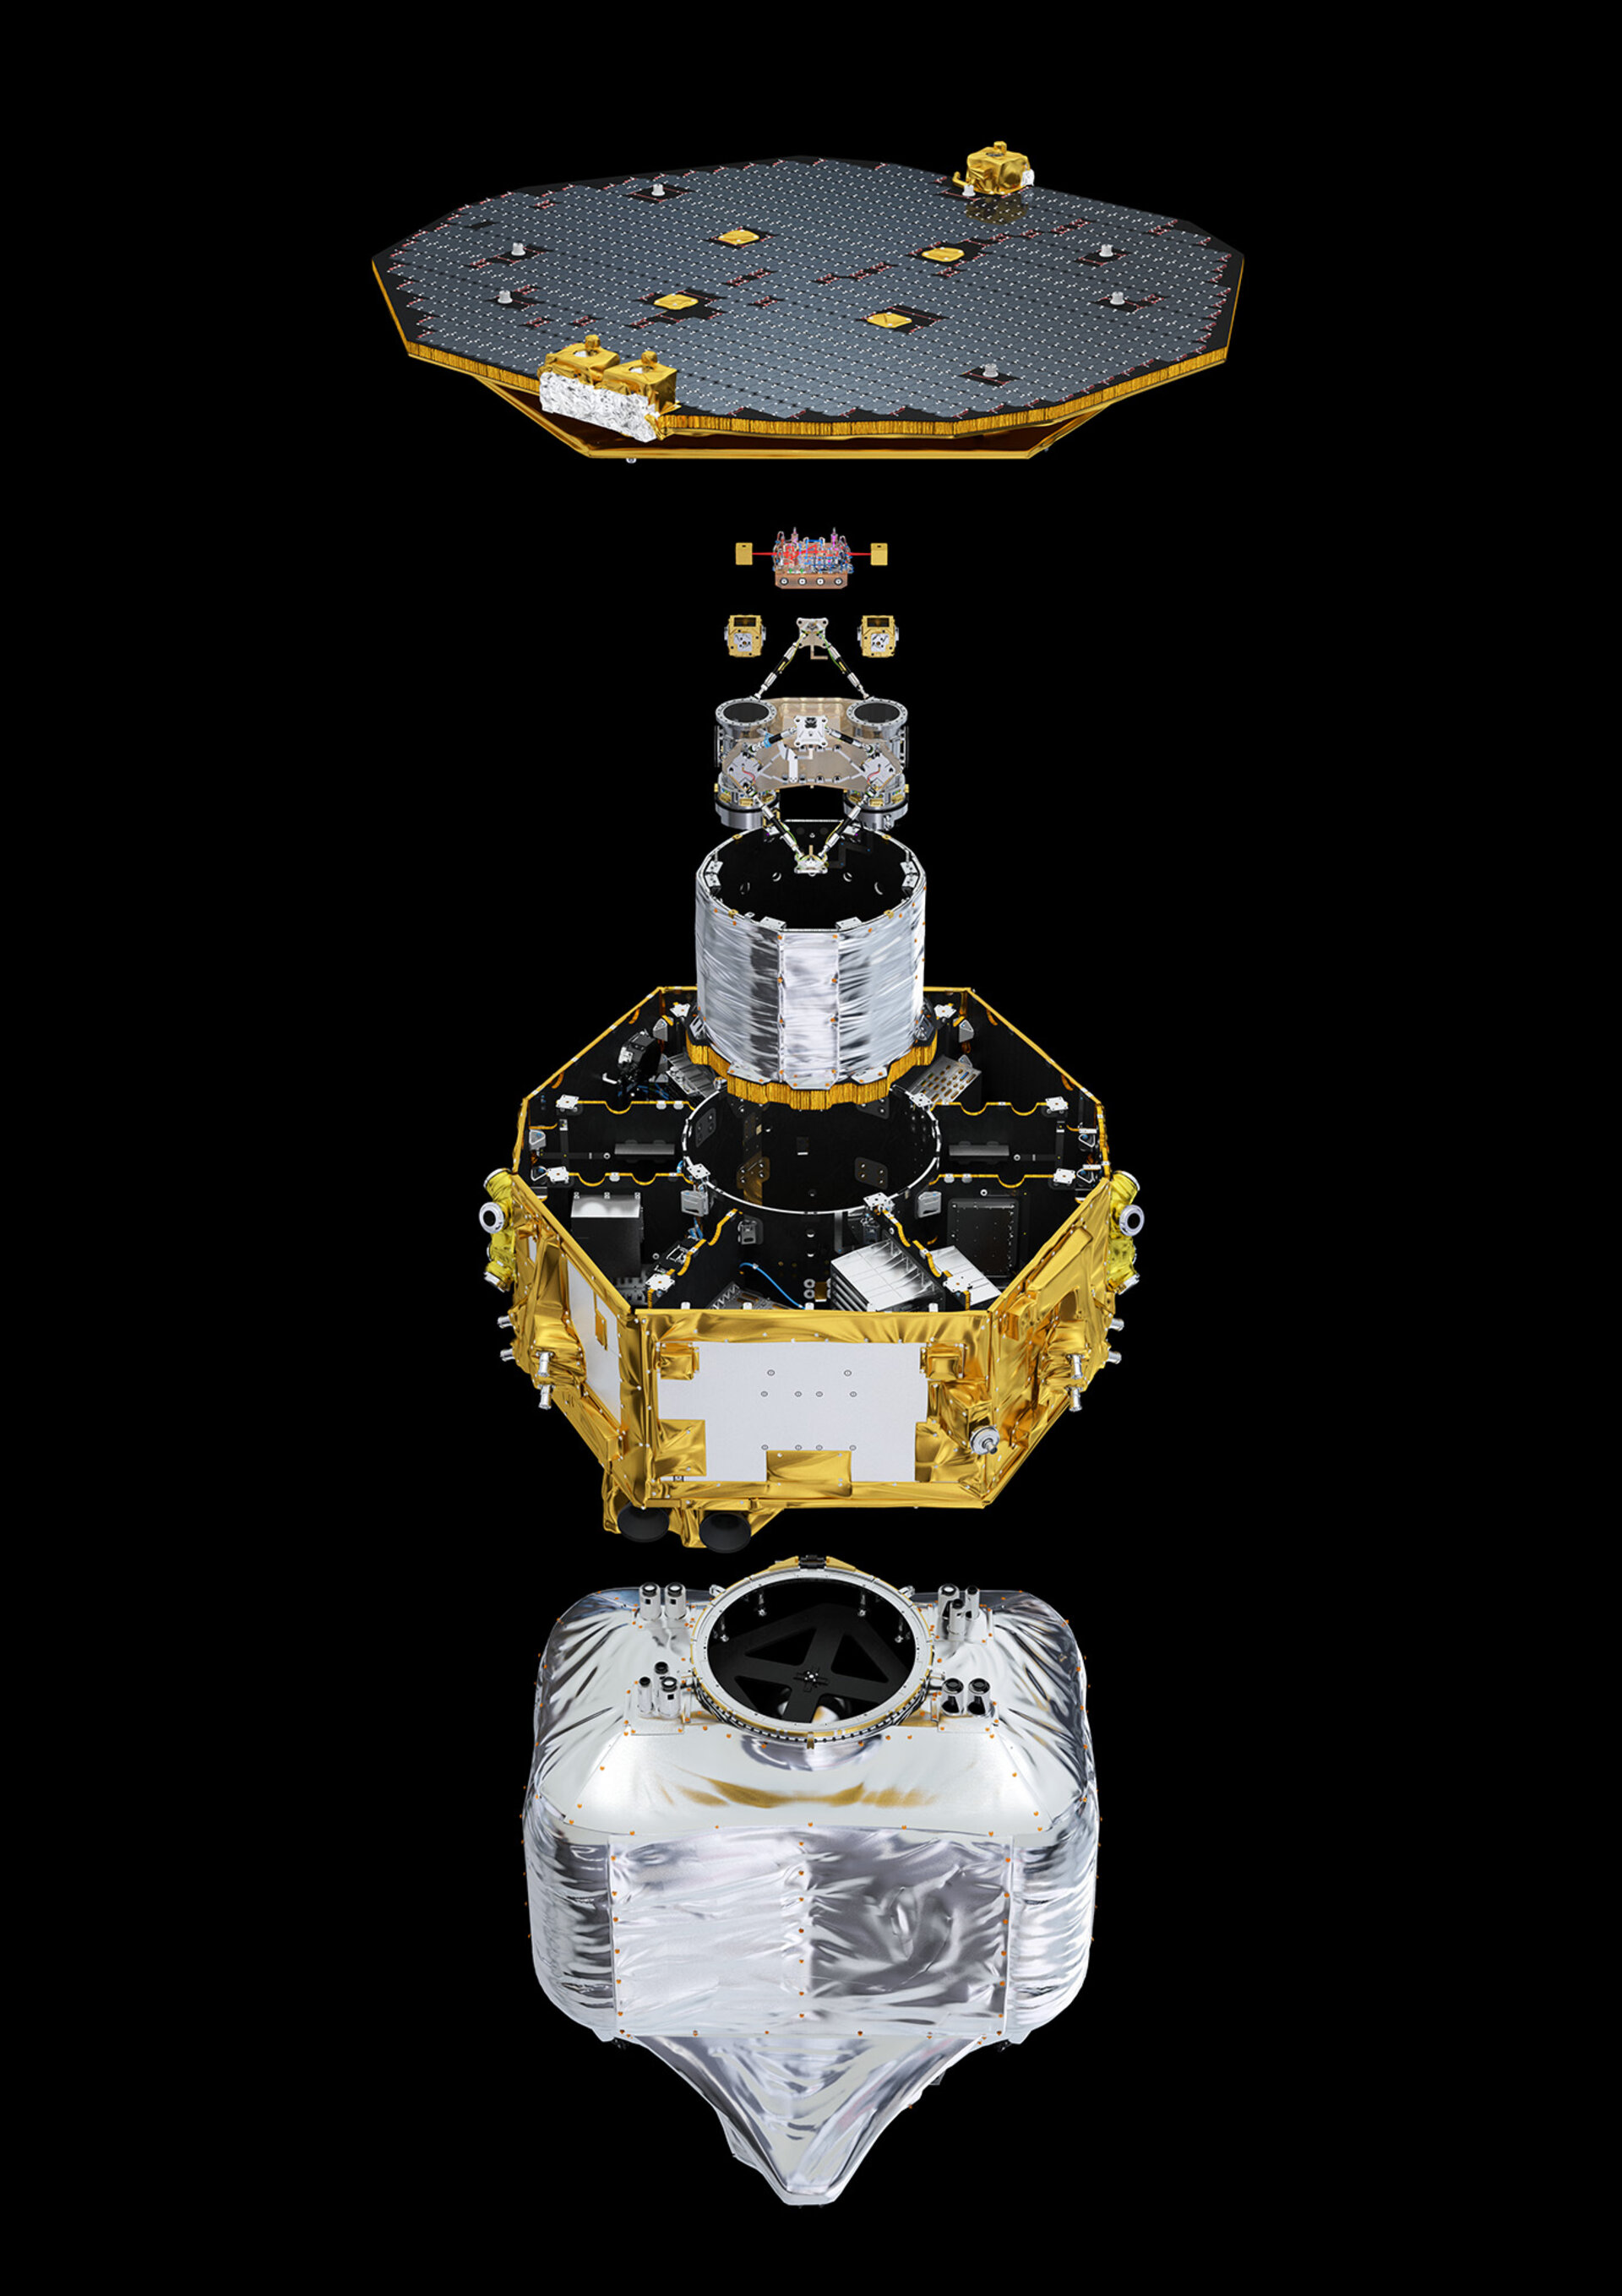 LISA Pathfinder exploded view